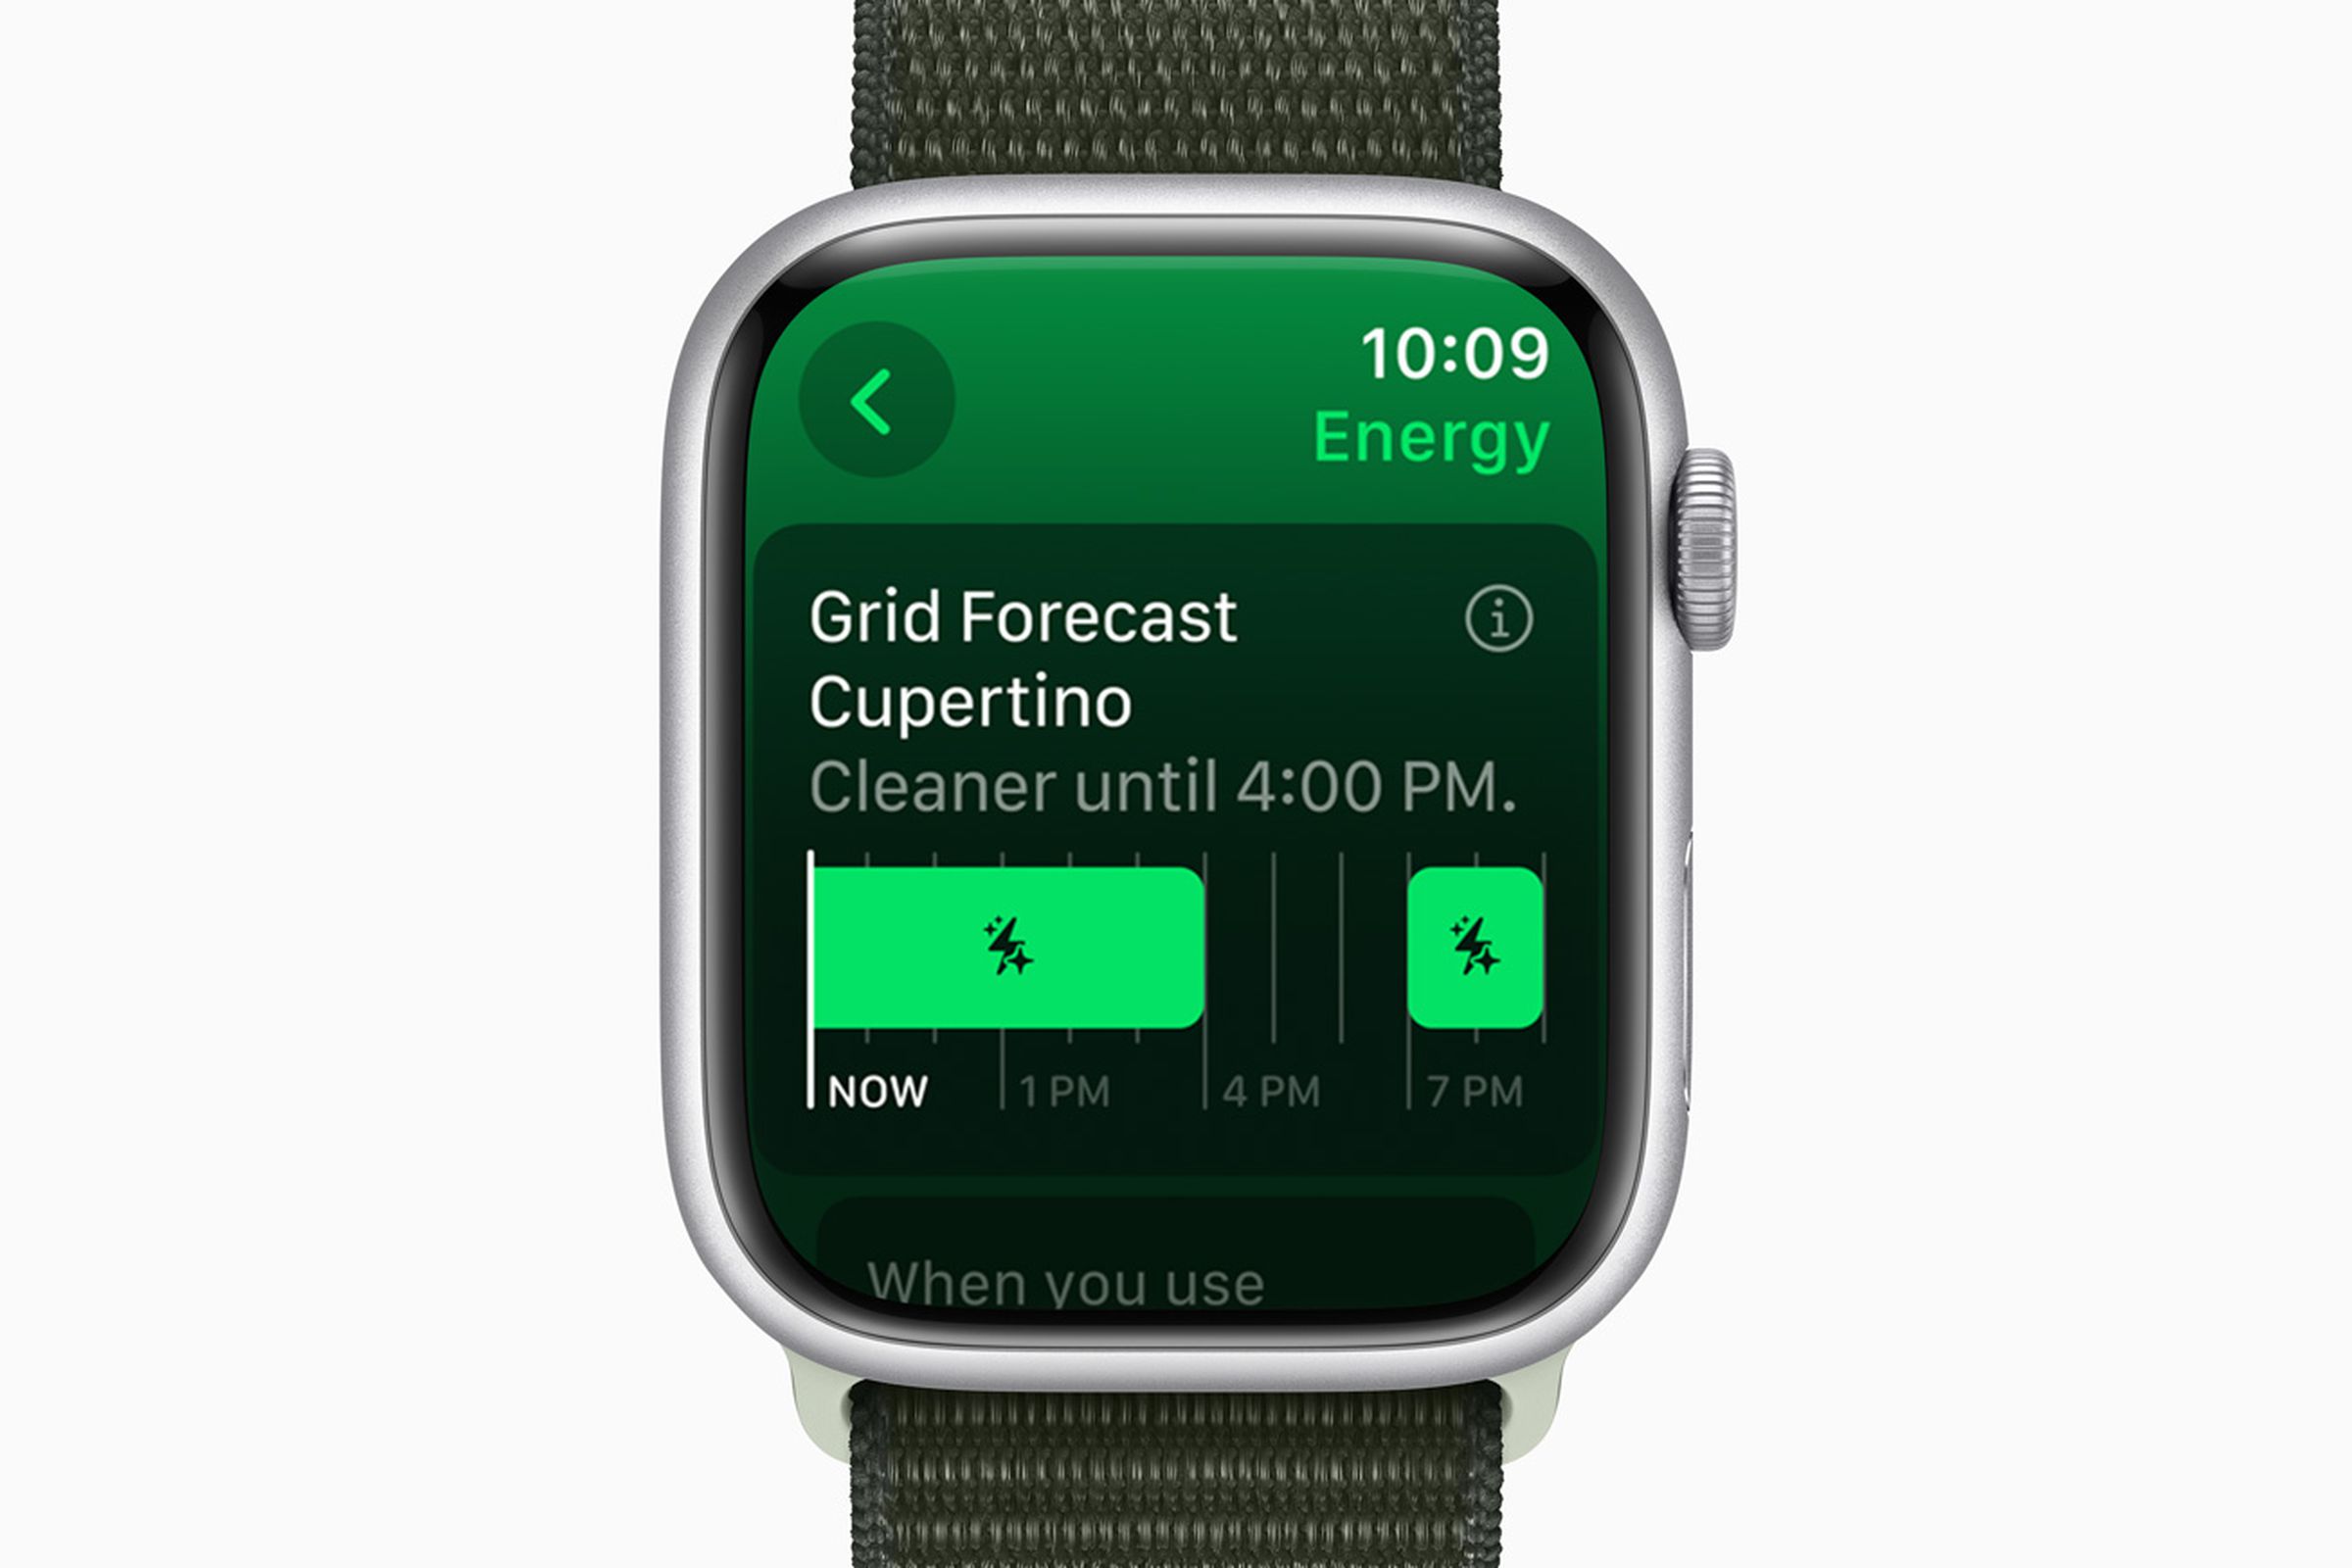 Grid Forecast is a new feature in the Apple Home app that tells you when your power grid has cleaner energy available.